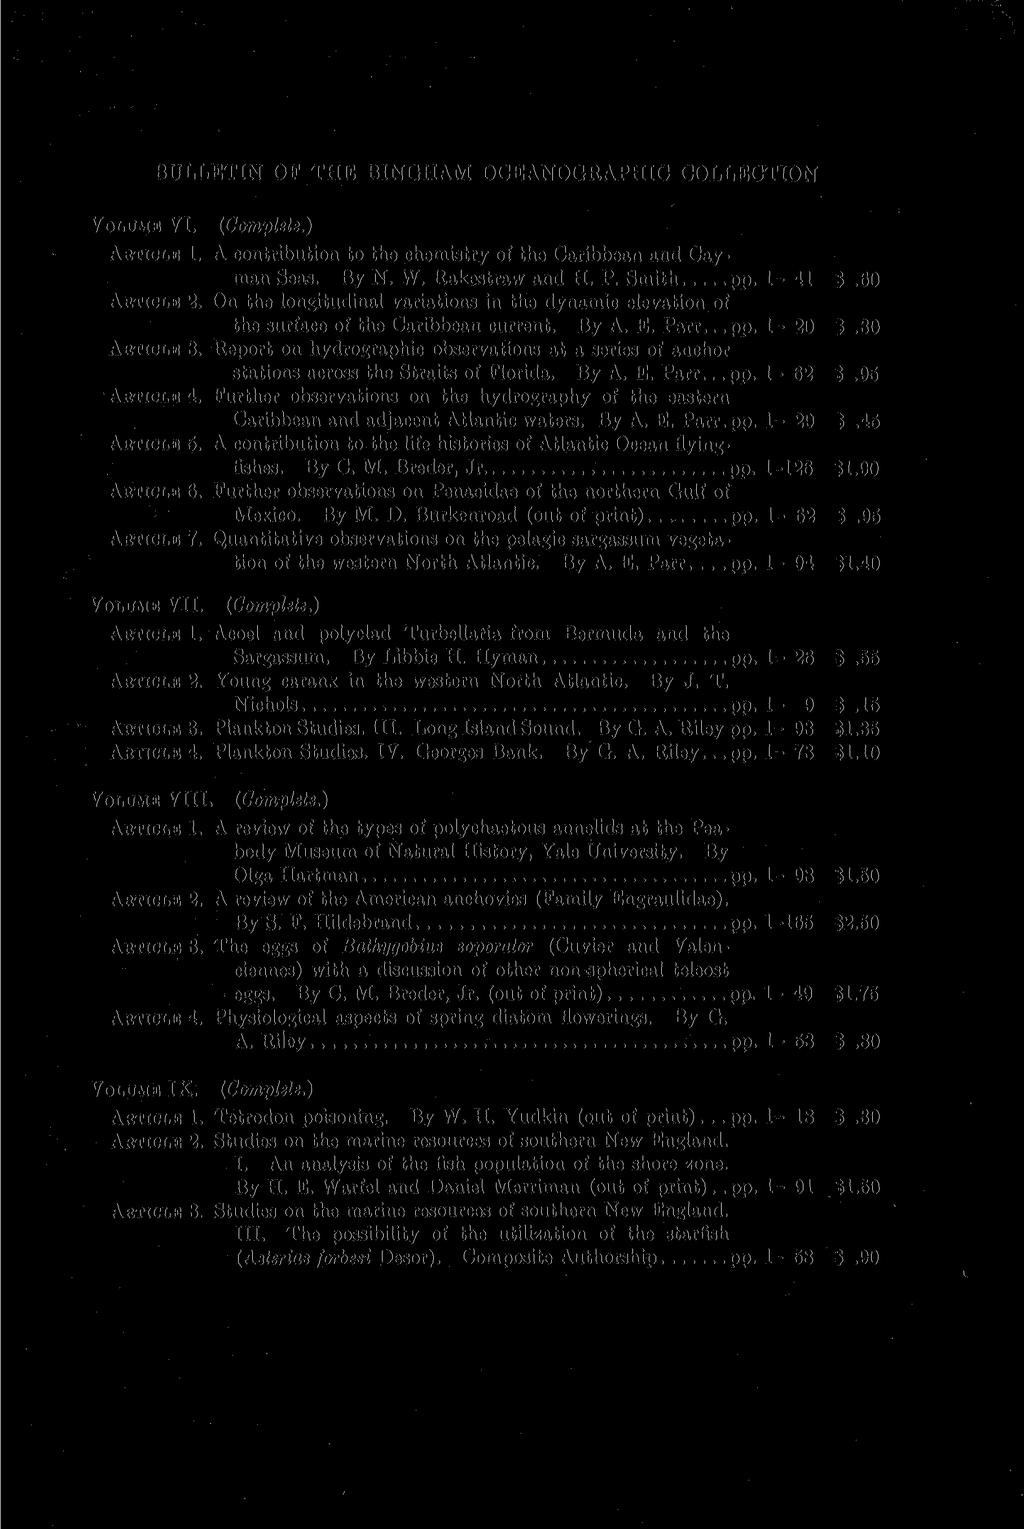 BULLETIN OF THE BINGHAM OCEANOGRAPHIC COLLECTION VOLUME VI. (Complete.) ARTICLE 1. A contribution to the chemistry of the Caribbean and Cayman Seas. By N. W. Rakestraw and H. P. Smith pp. - 41 $.